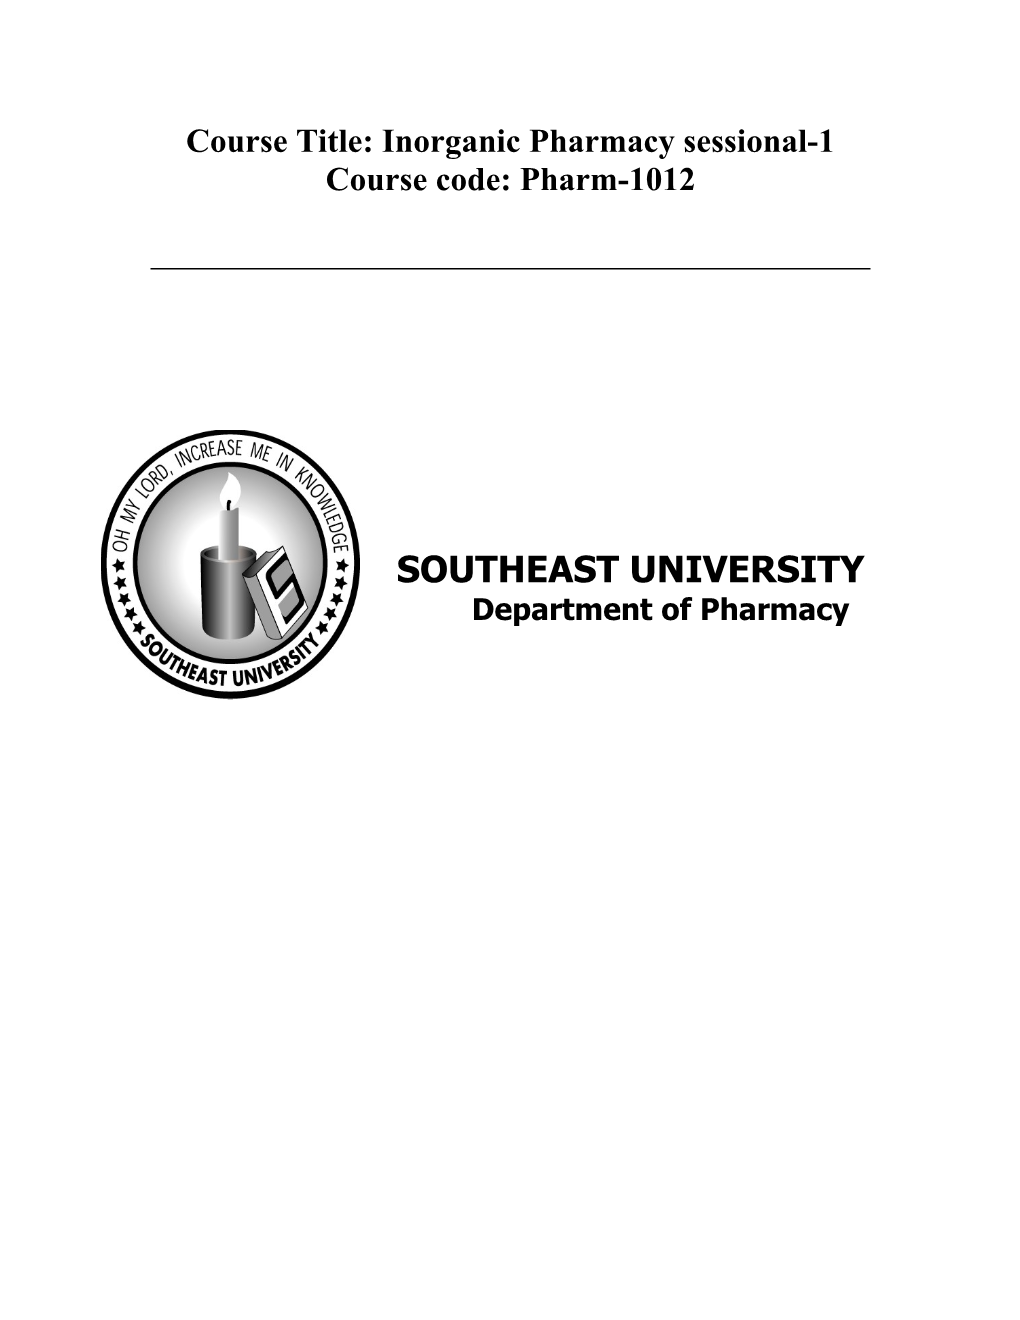 Course Title: Inorganic Pharmacy Sessional-1